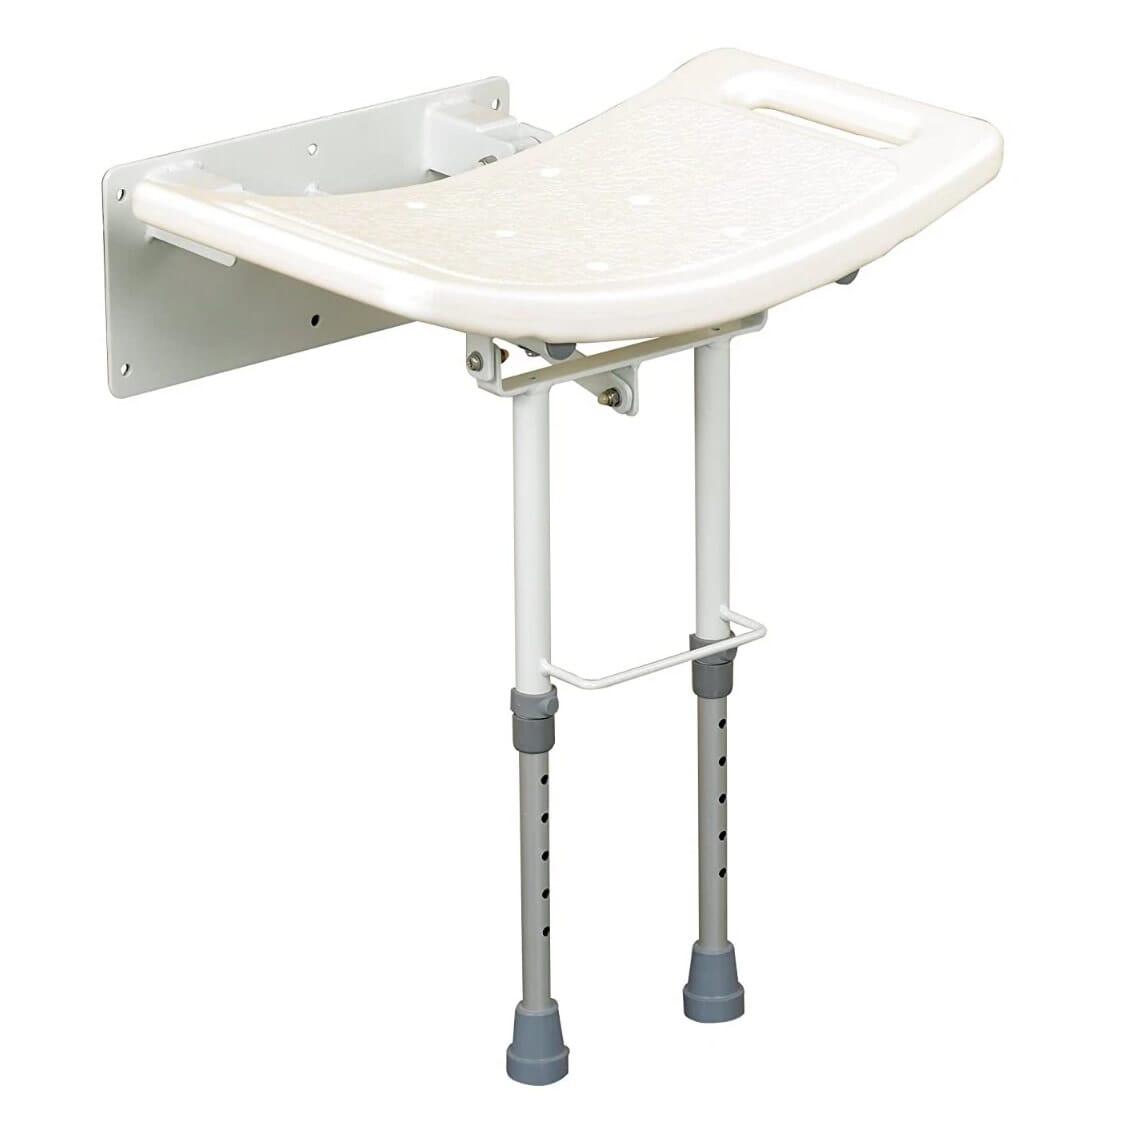 View Days Wall Mounted Shower Seat with Legs Aluminium information